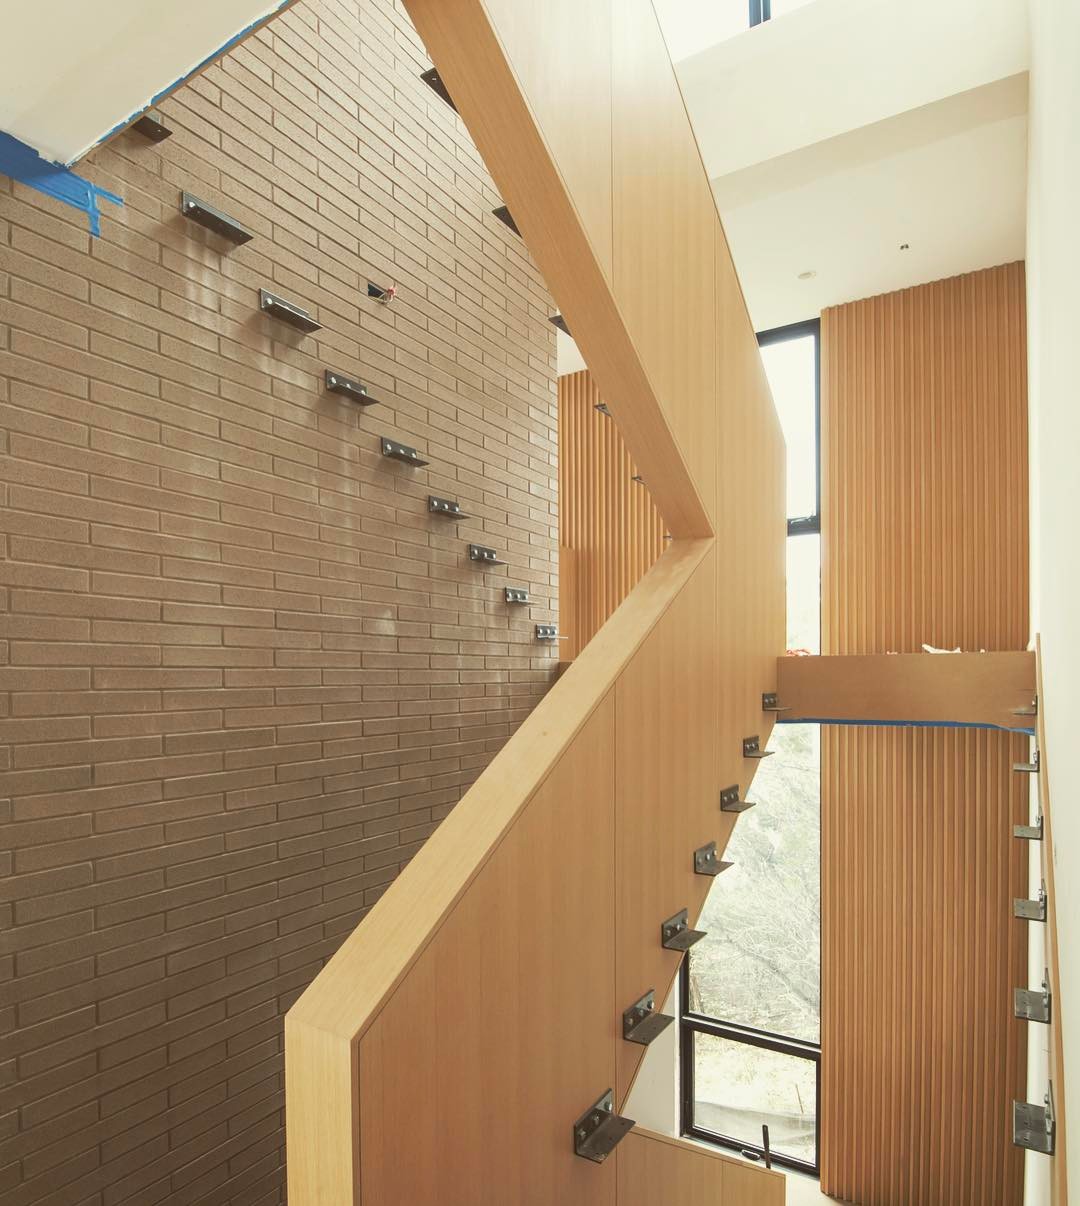 Only one chance to nail these tread clips!! Foursquare Builders team of craftsmen were up to the task. Built by @foursquarebuilders Designed by Trim by @mendservices photo by @redpantsstudio